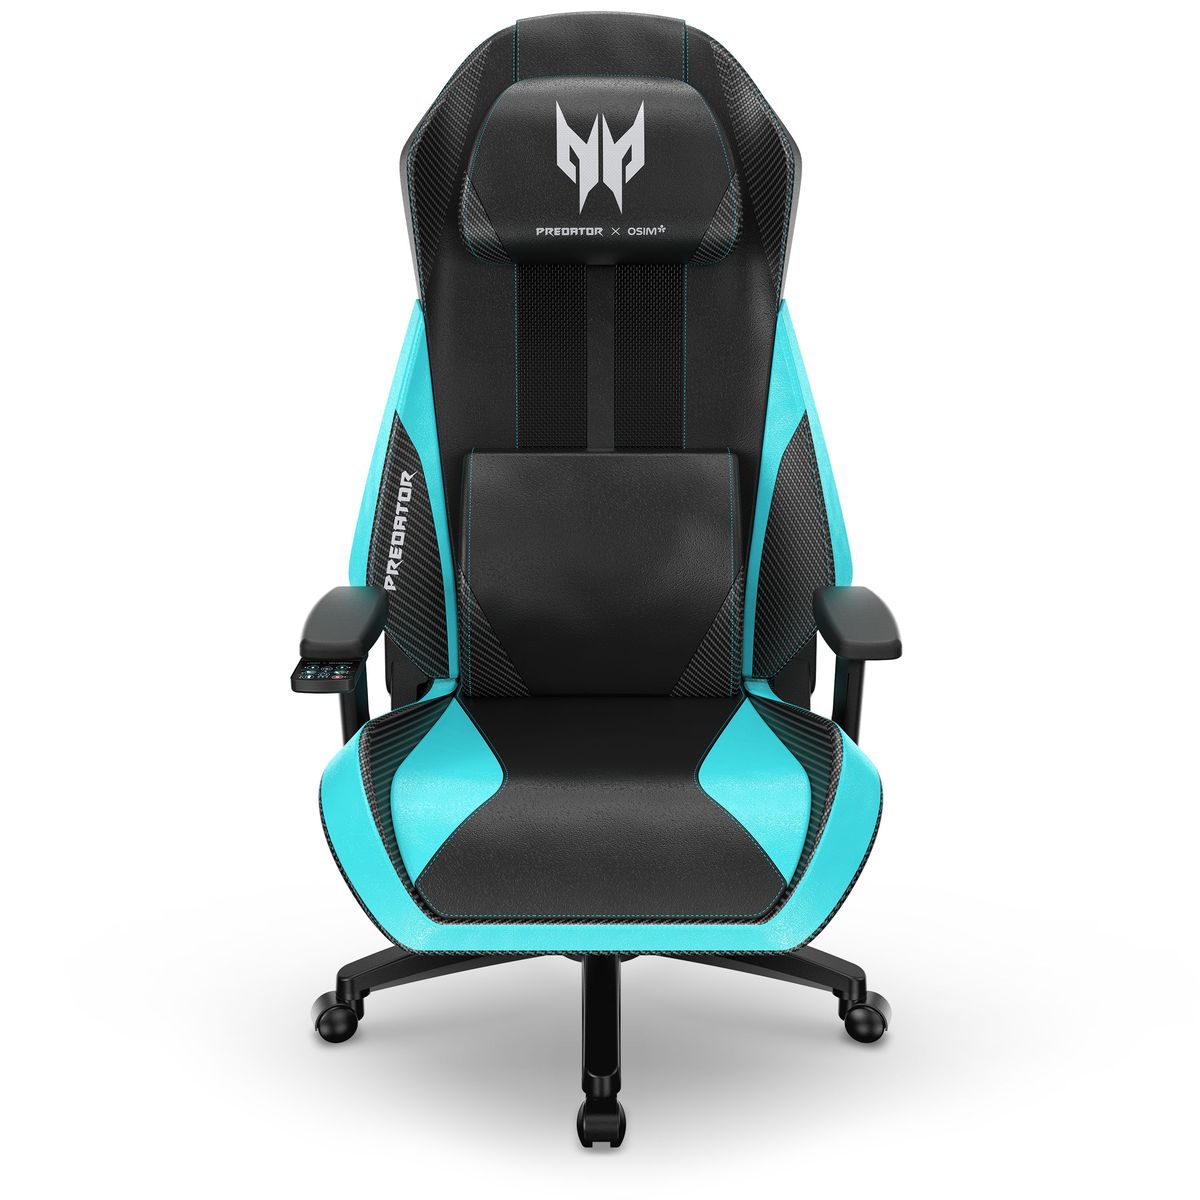  Acer  Brings Massage Gamer Chairs  to the